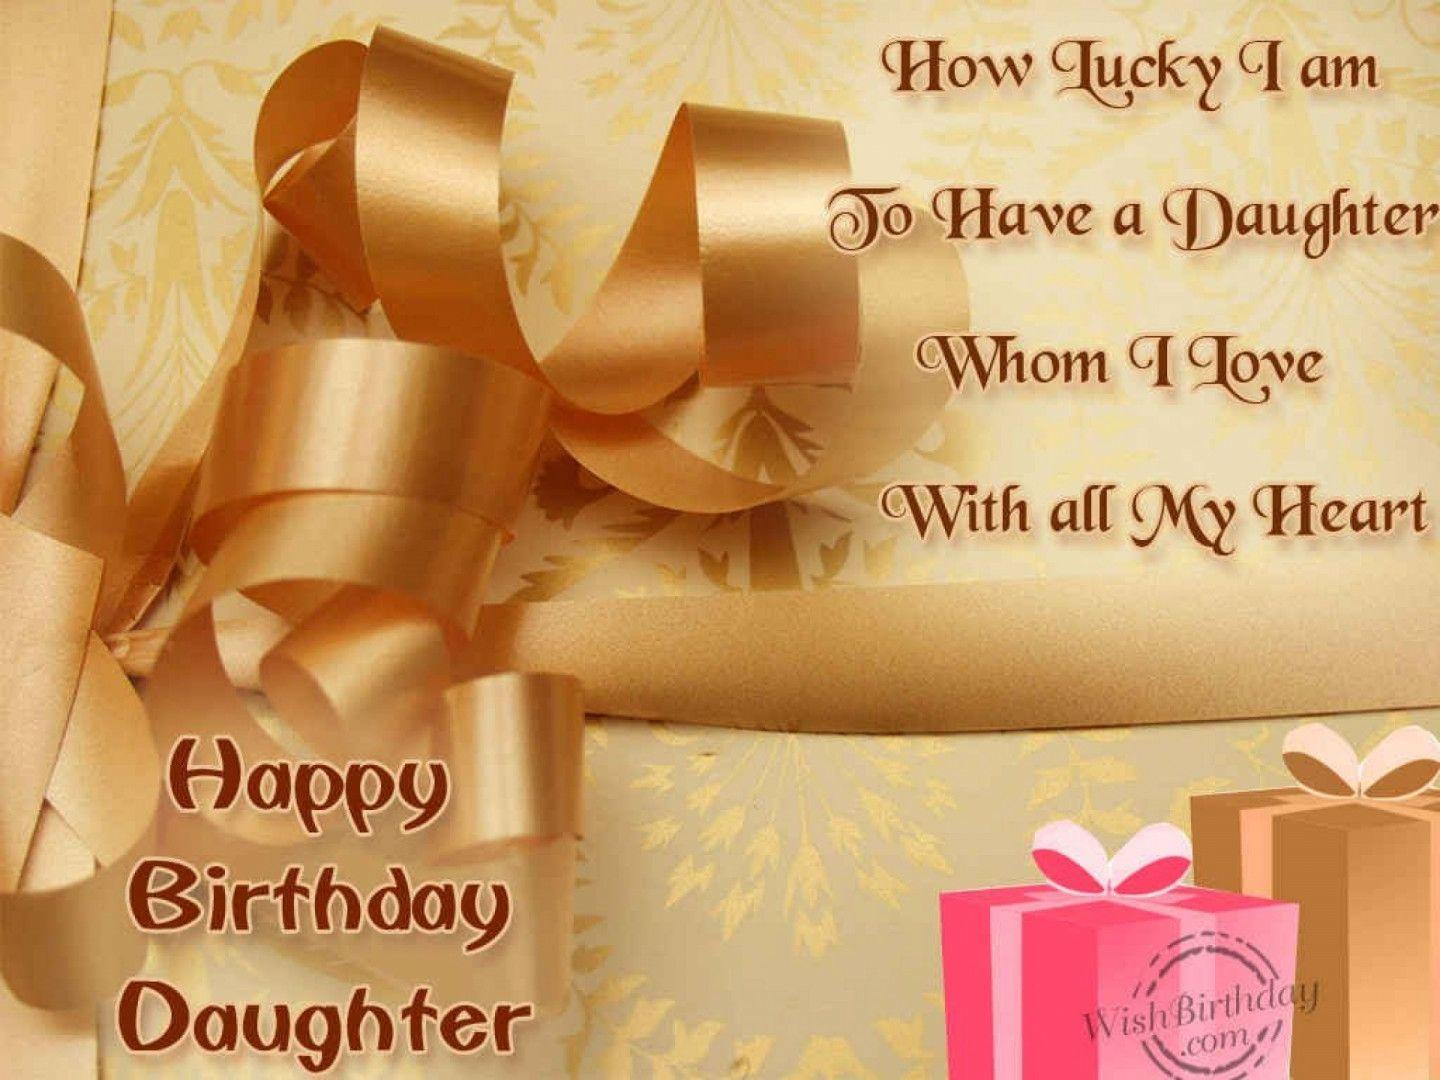 Download Happy Birthday Image Free Download for Mobile